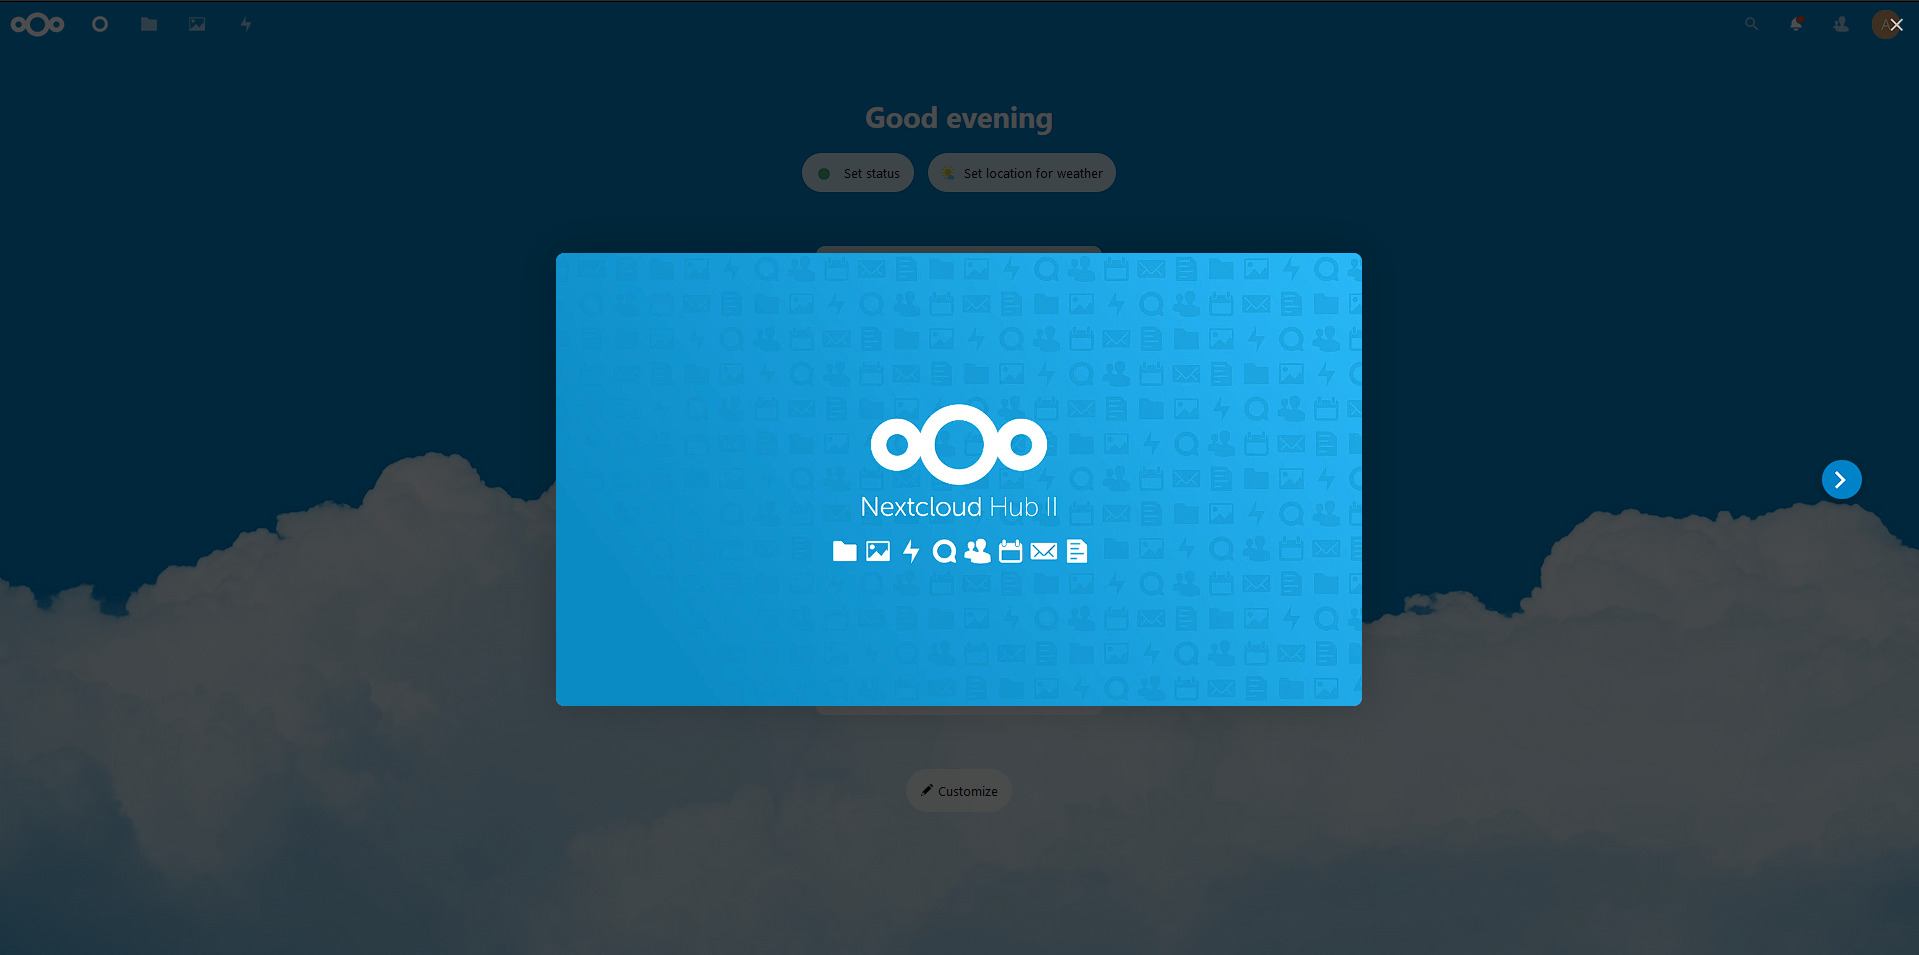 The installation screen confirming you've successfully installed Nextcloud.